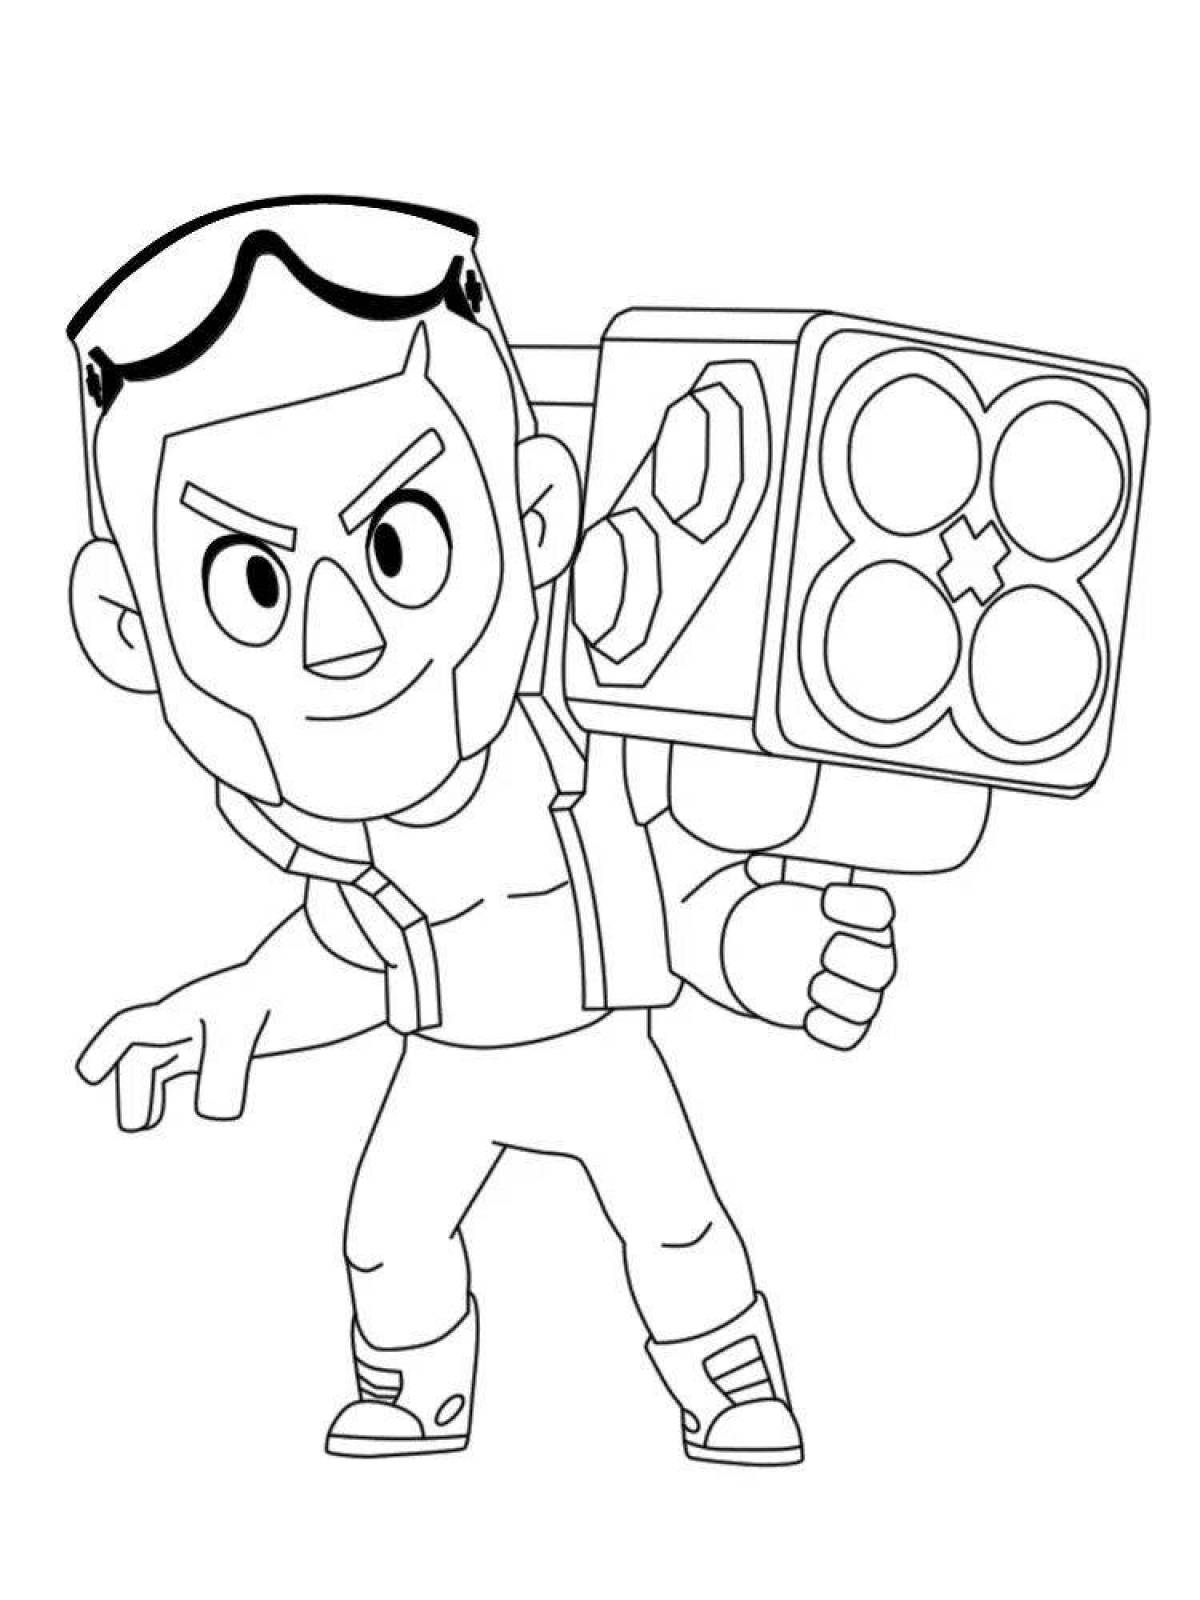 Brock's colorful coloring page